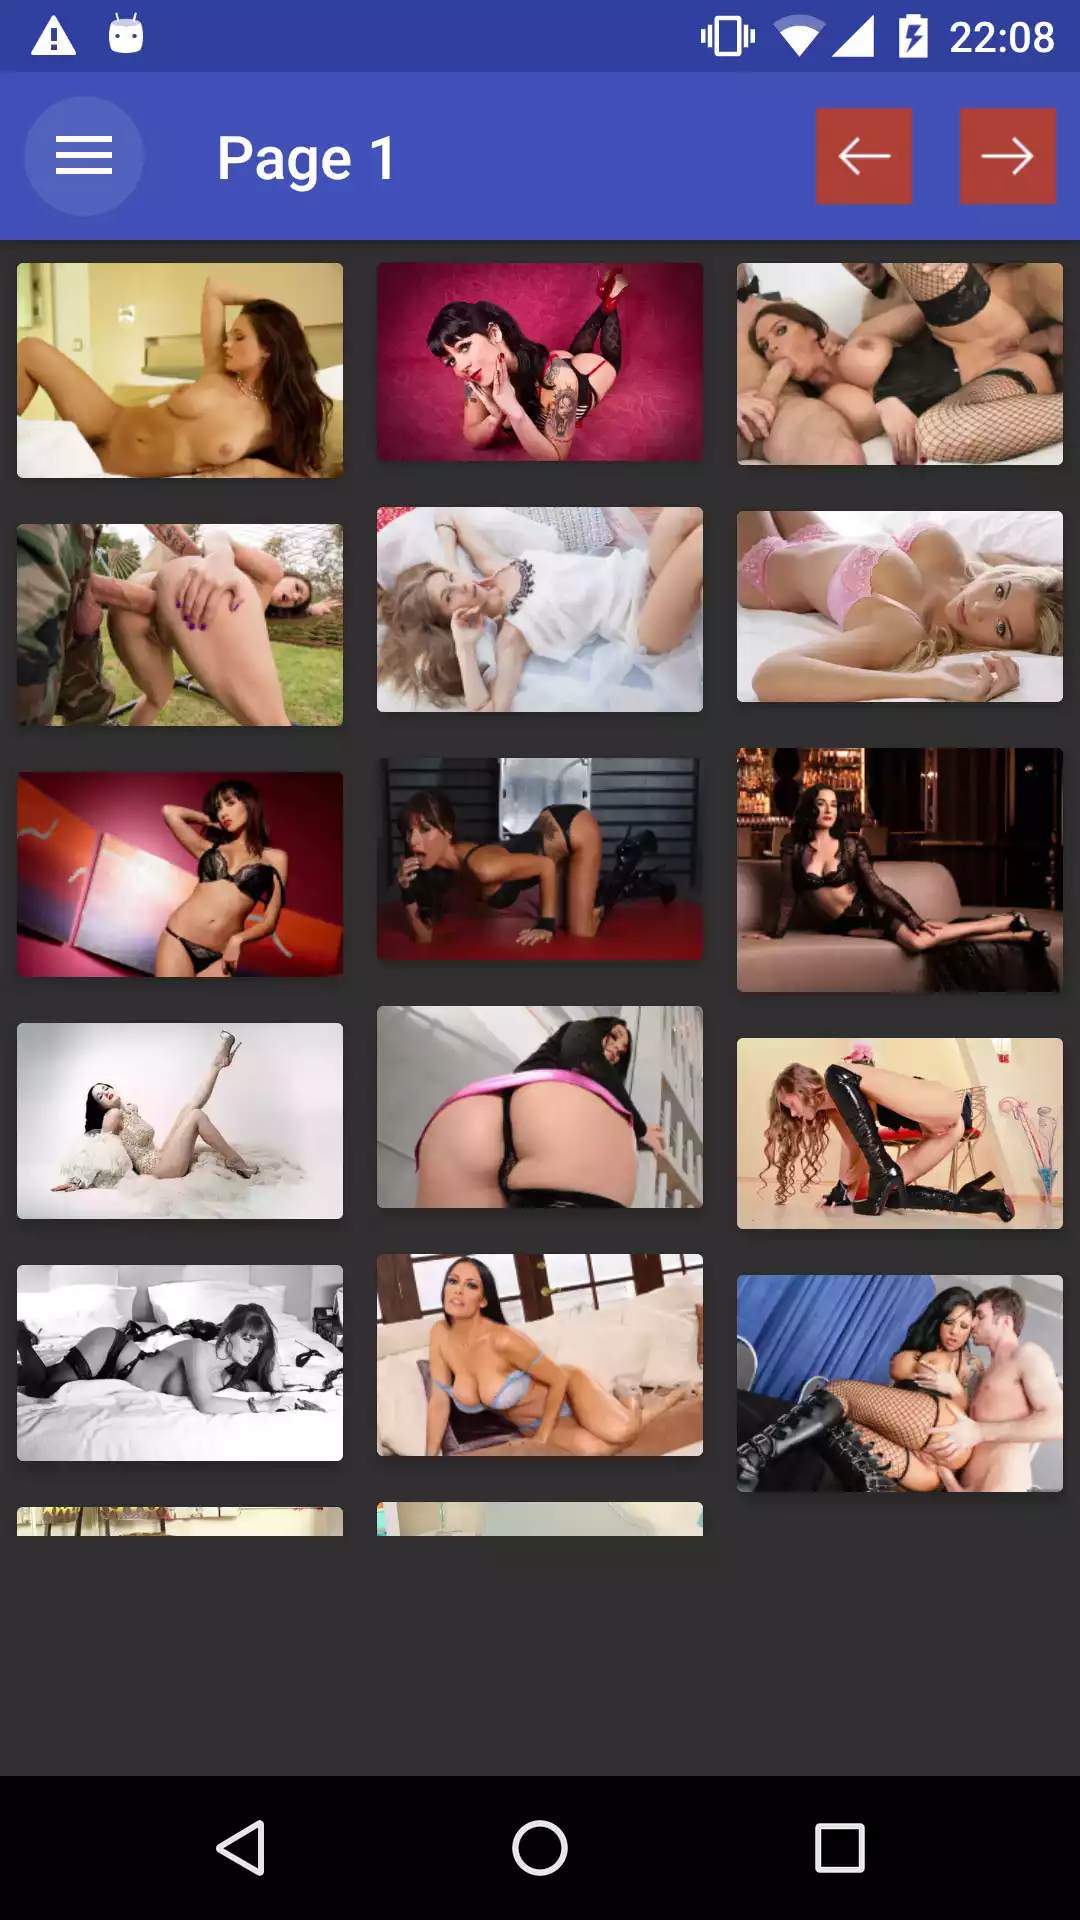 Pornstar Wallpapers 2 adult,apps,aplikasi,best,for,download,pics,pictures,apk,wallpapers,ecchi,porn,sexgalleries,galleries,android,hot,image,hentai,anime,photos,henati,star,sexy